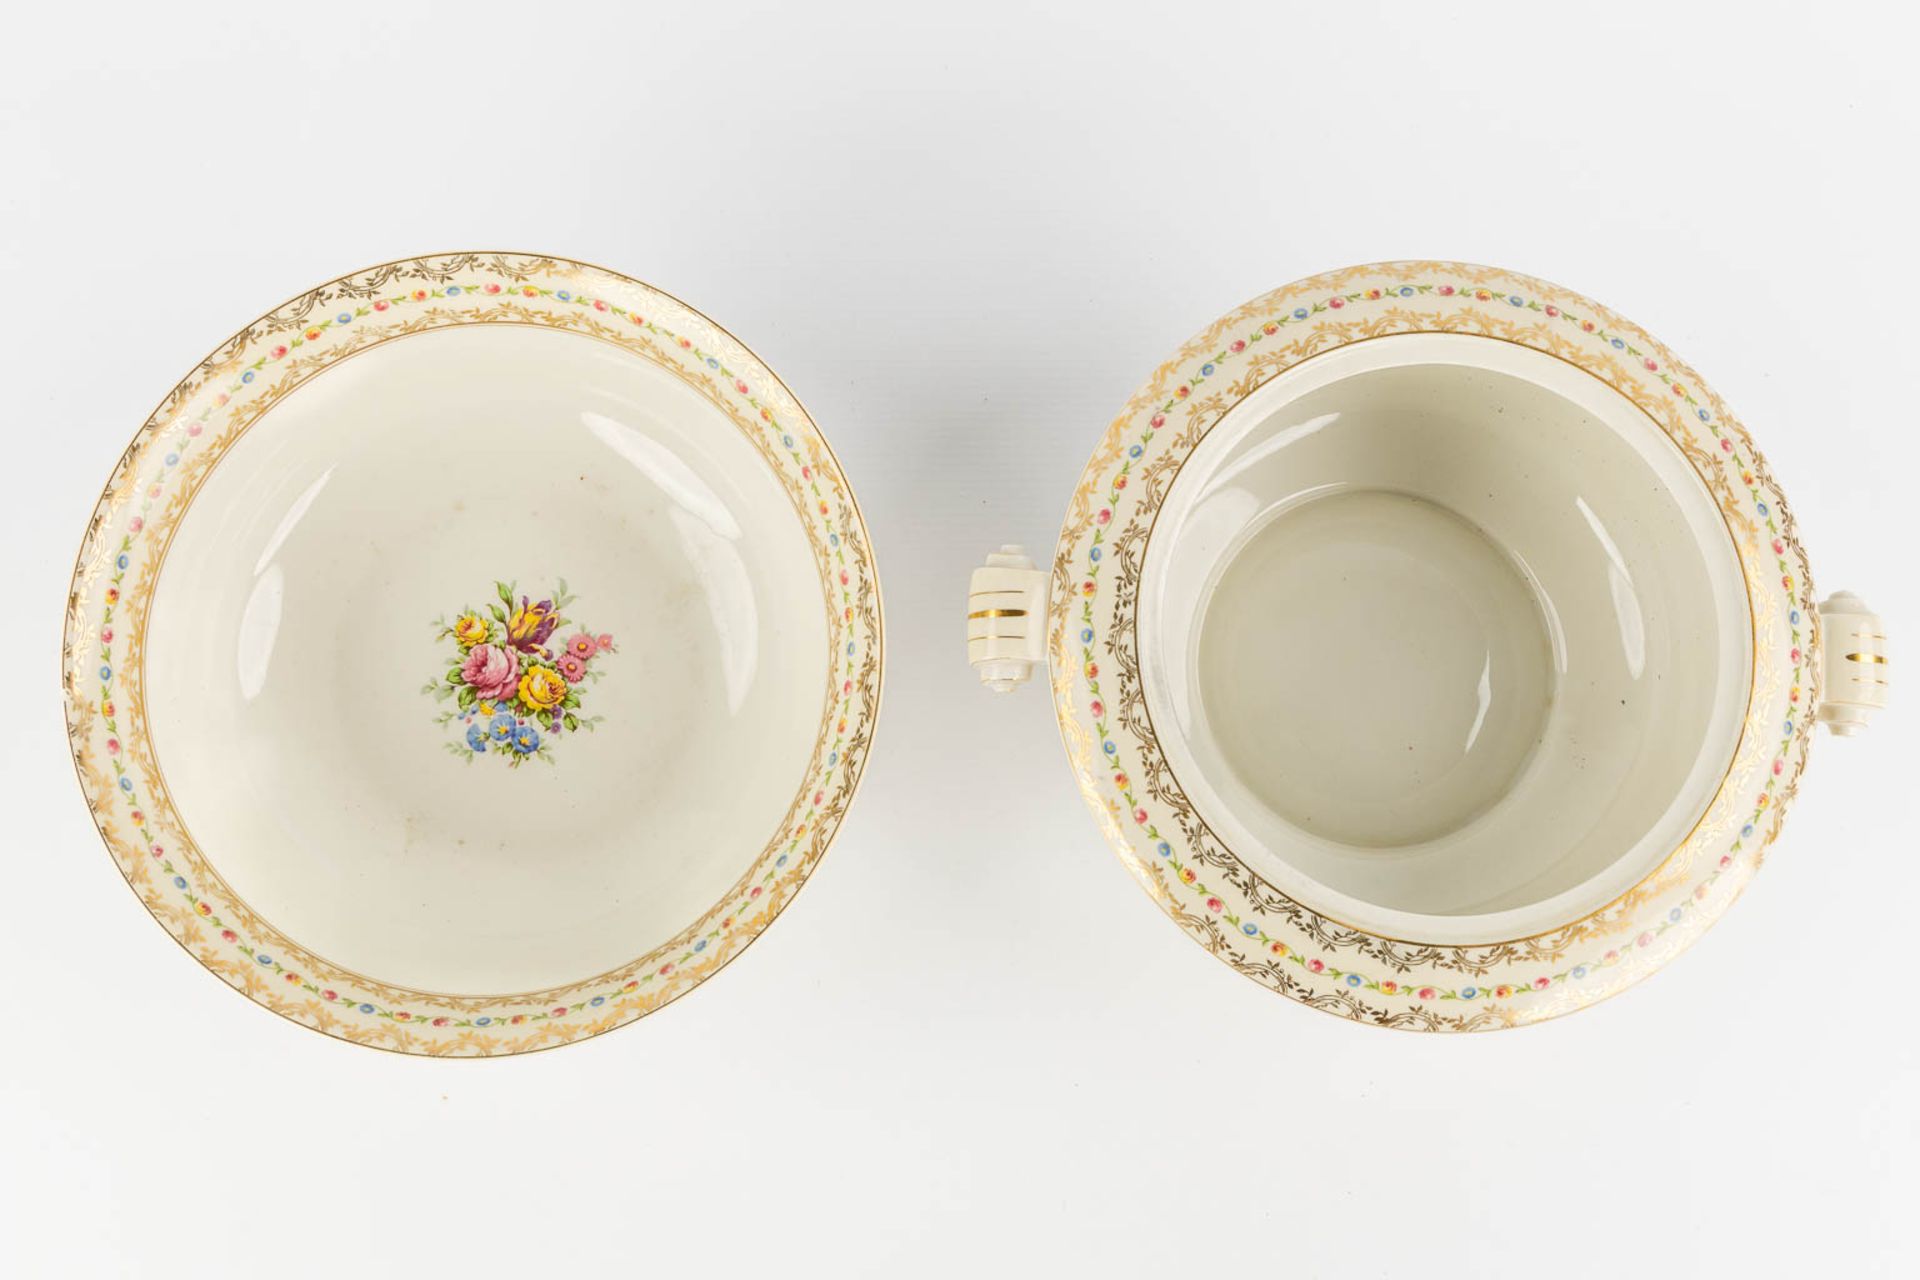 Raynaud, Limoges, a large dinner service. (L:25 x W:35 cm) - Image 15 of 16